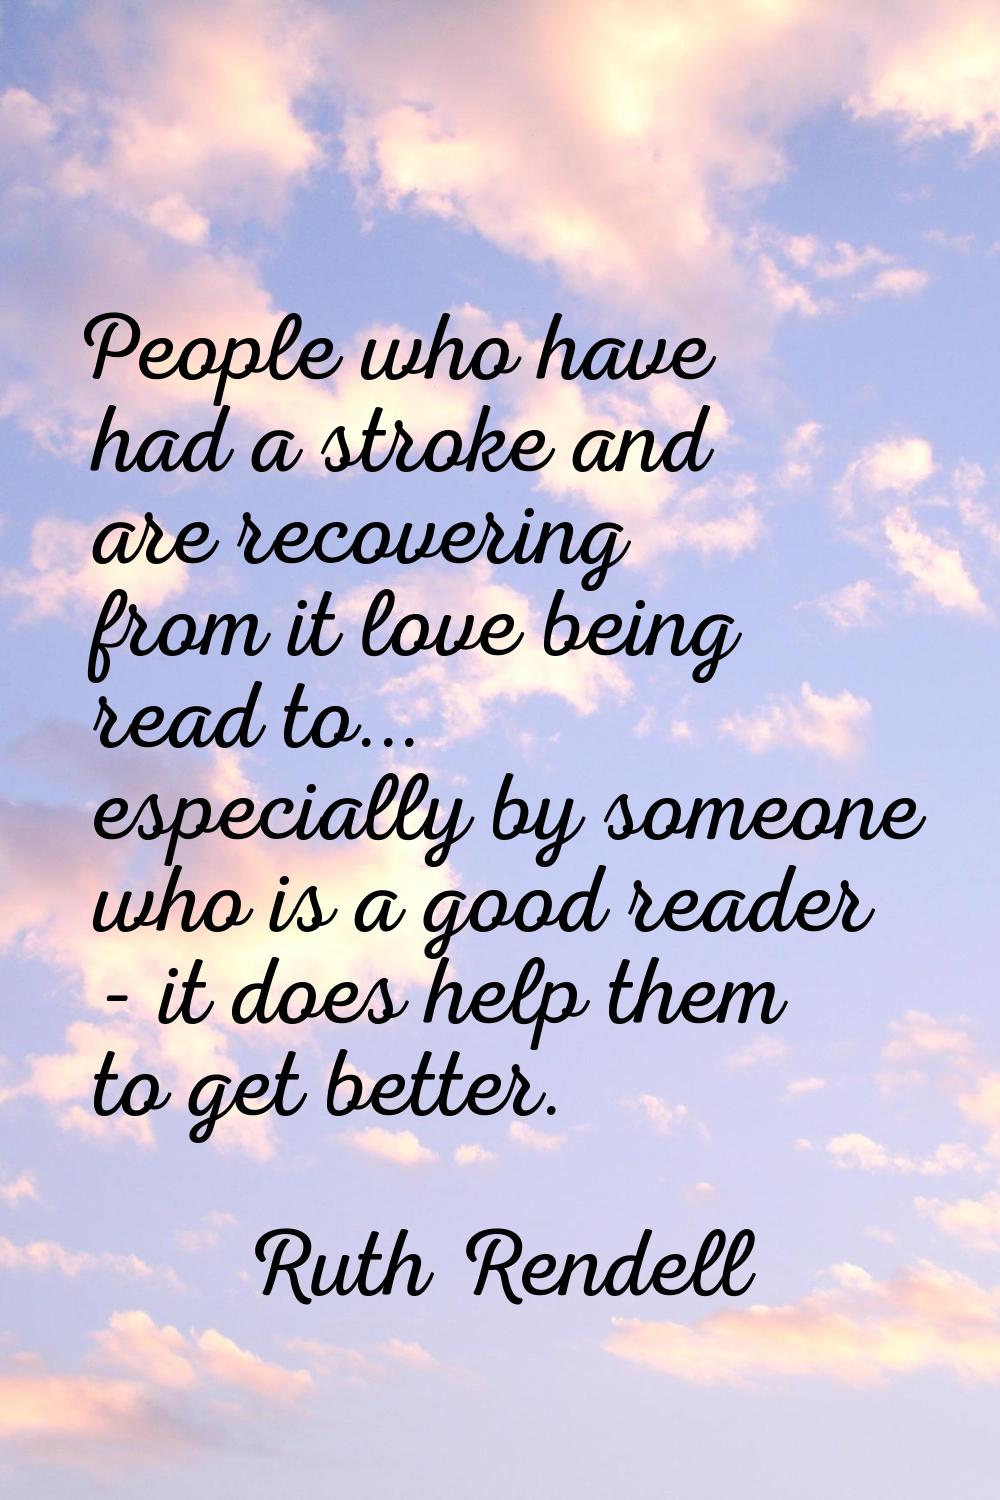 People who have had a stroke and are recovering from it love being read to... especially by someone